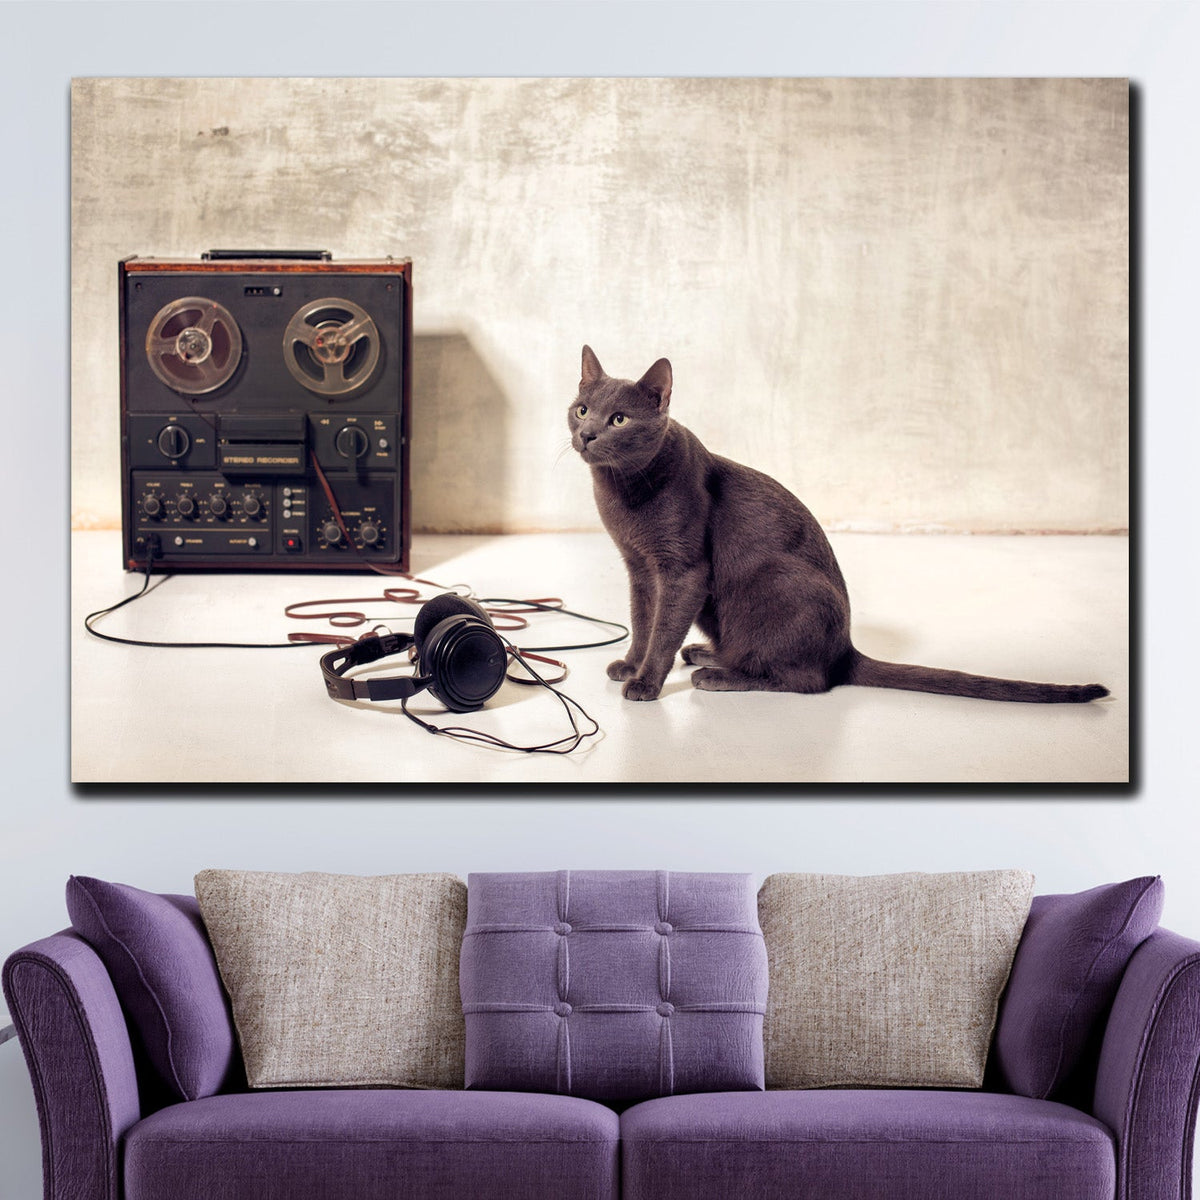 https://cdn.shopify.com/s/files/1/0387/9986/8044/products/HipsterCatandMagnetophonCanvasArtprintStretched-1.jpg